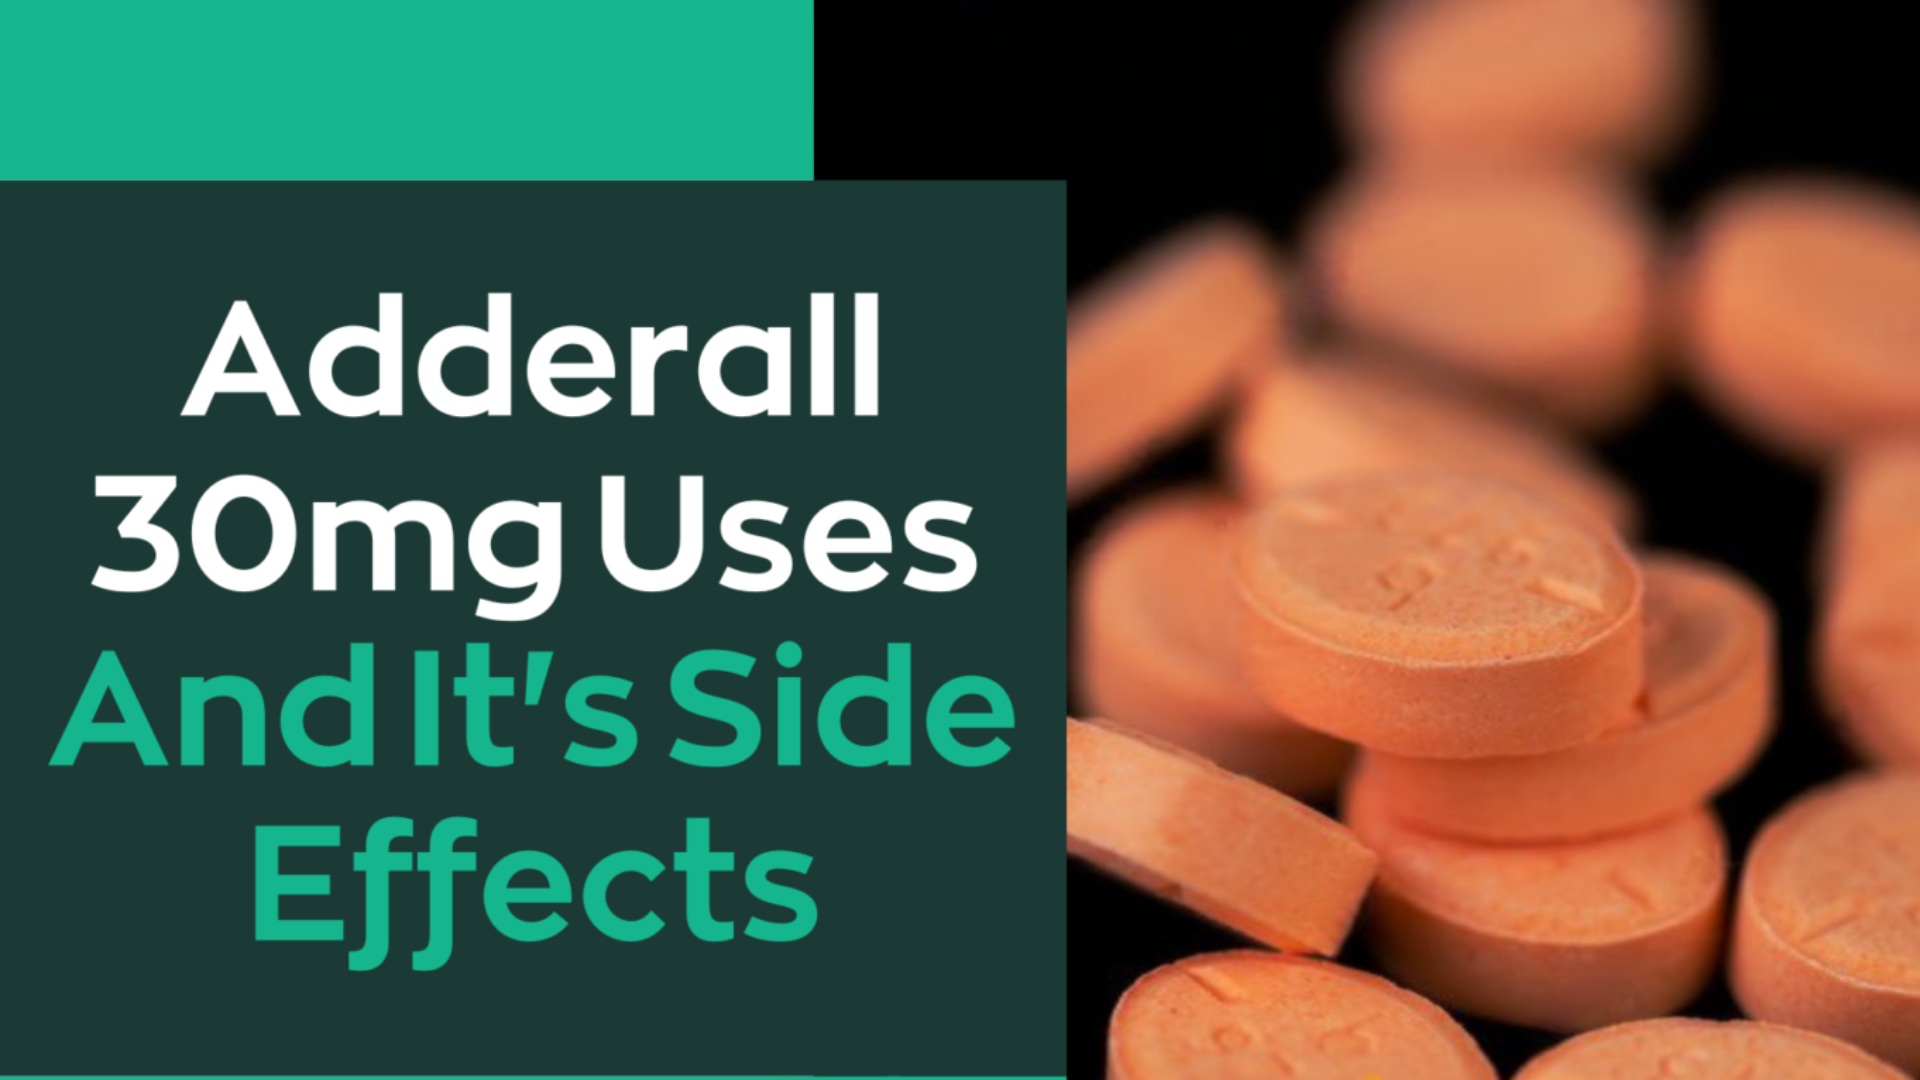 What is Adderall used For?